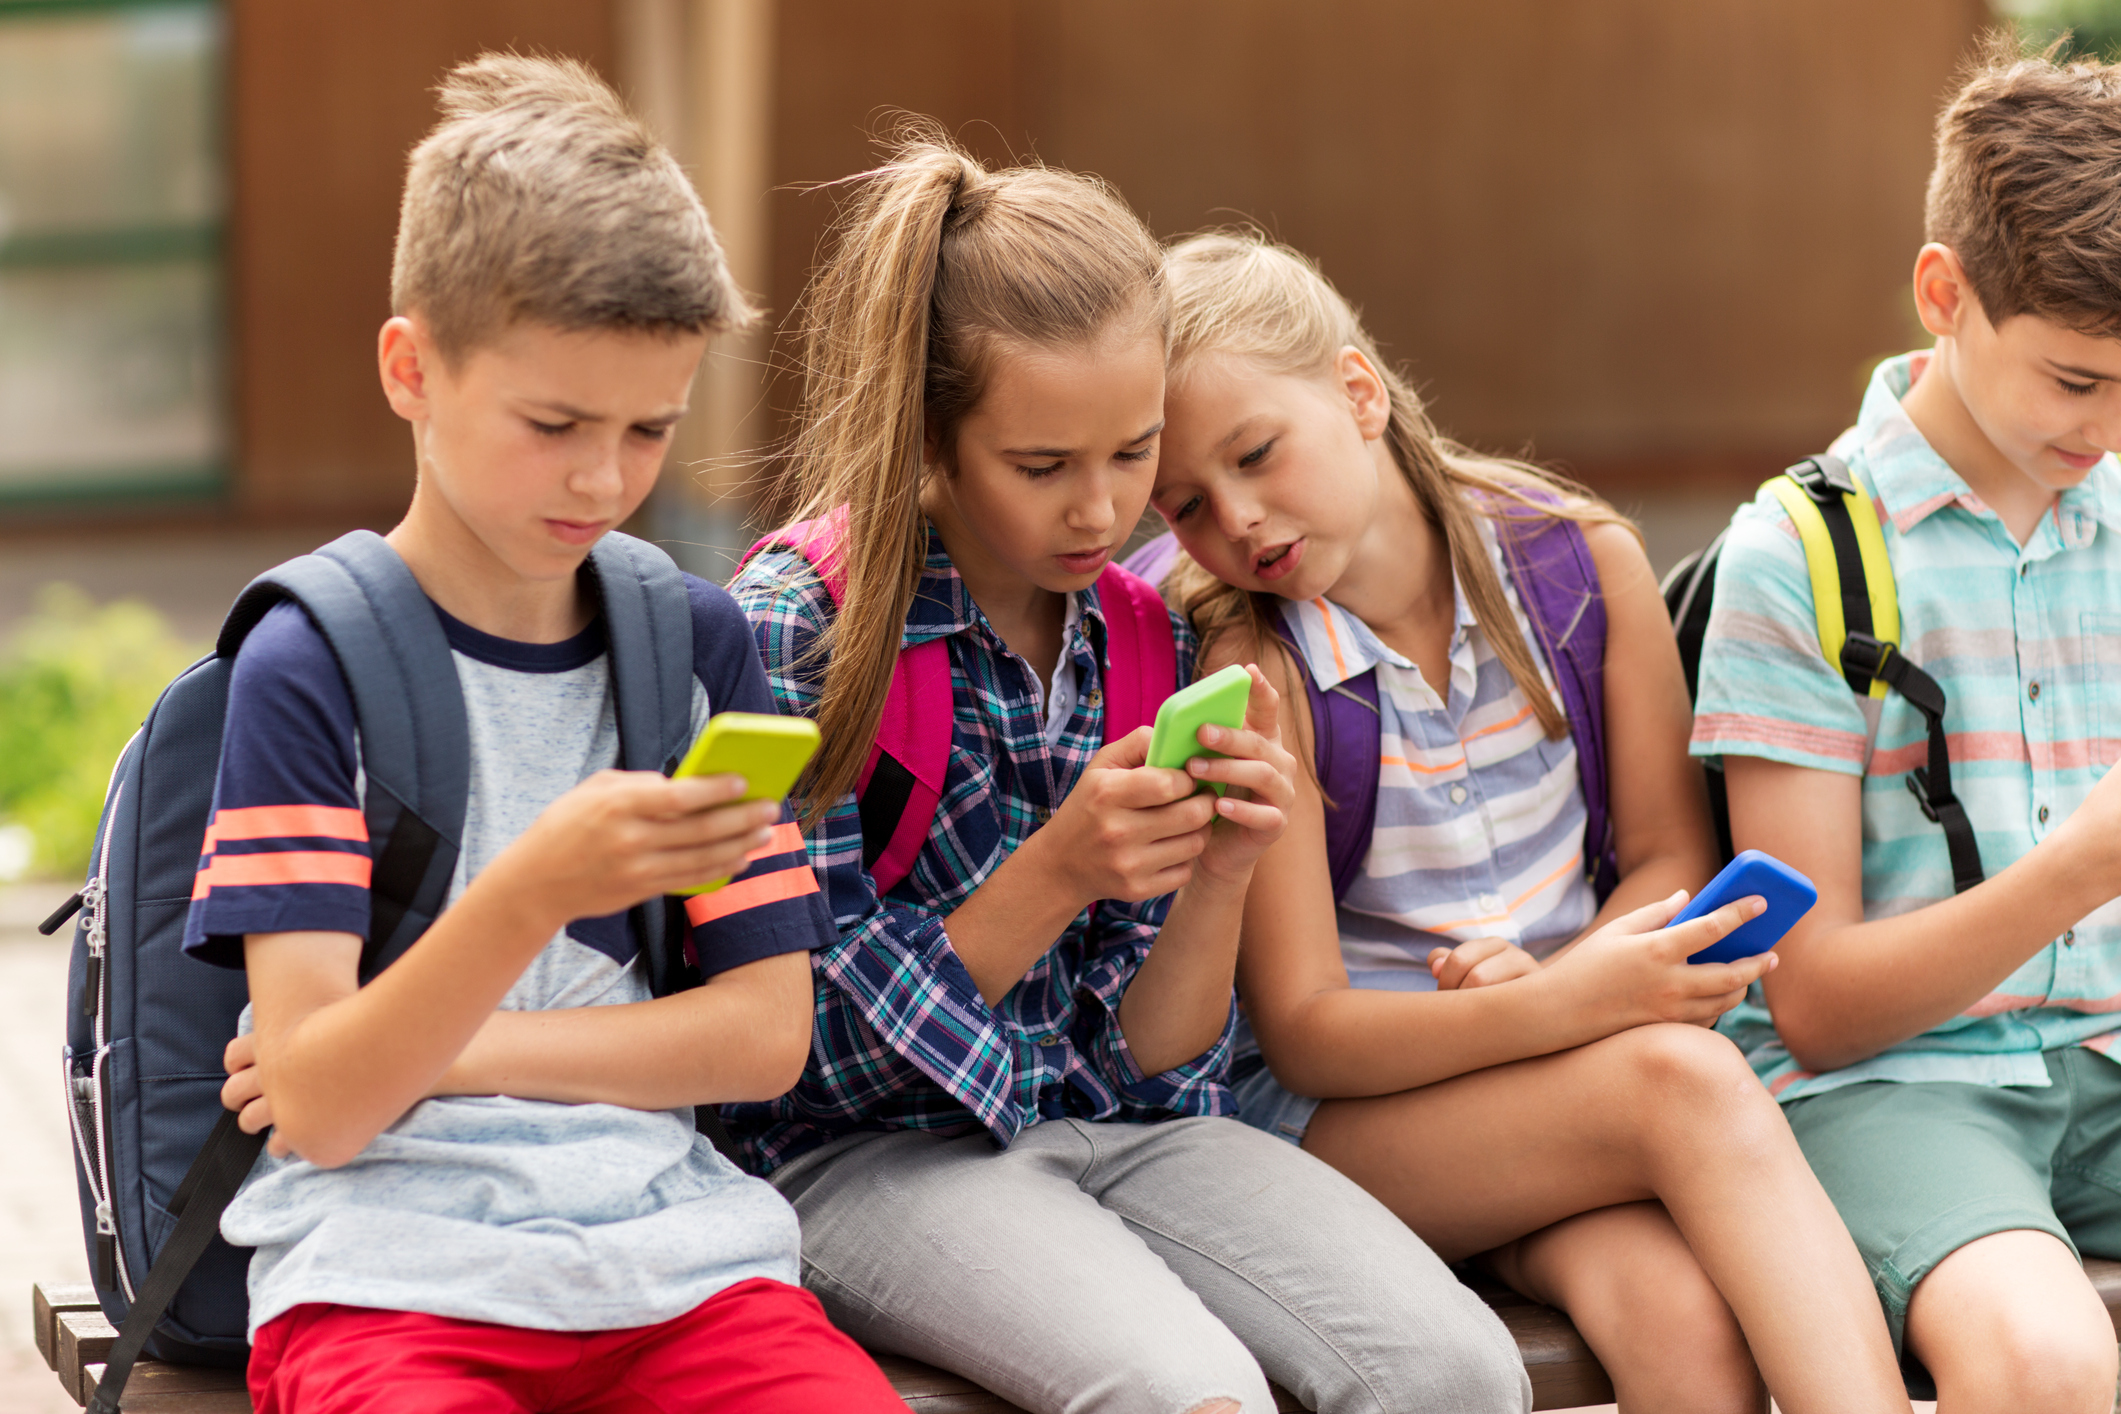 7 Quick Tips to Keep Your Kids Safe Online